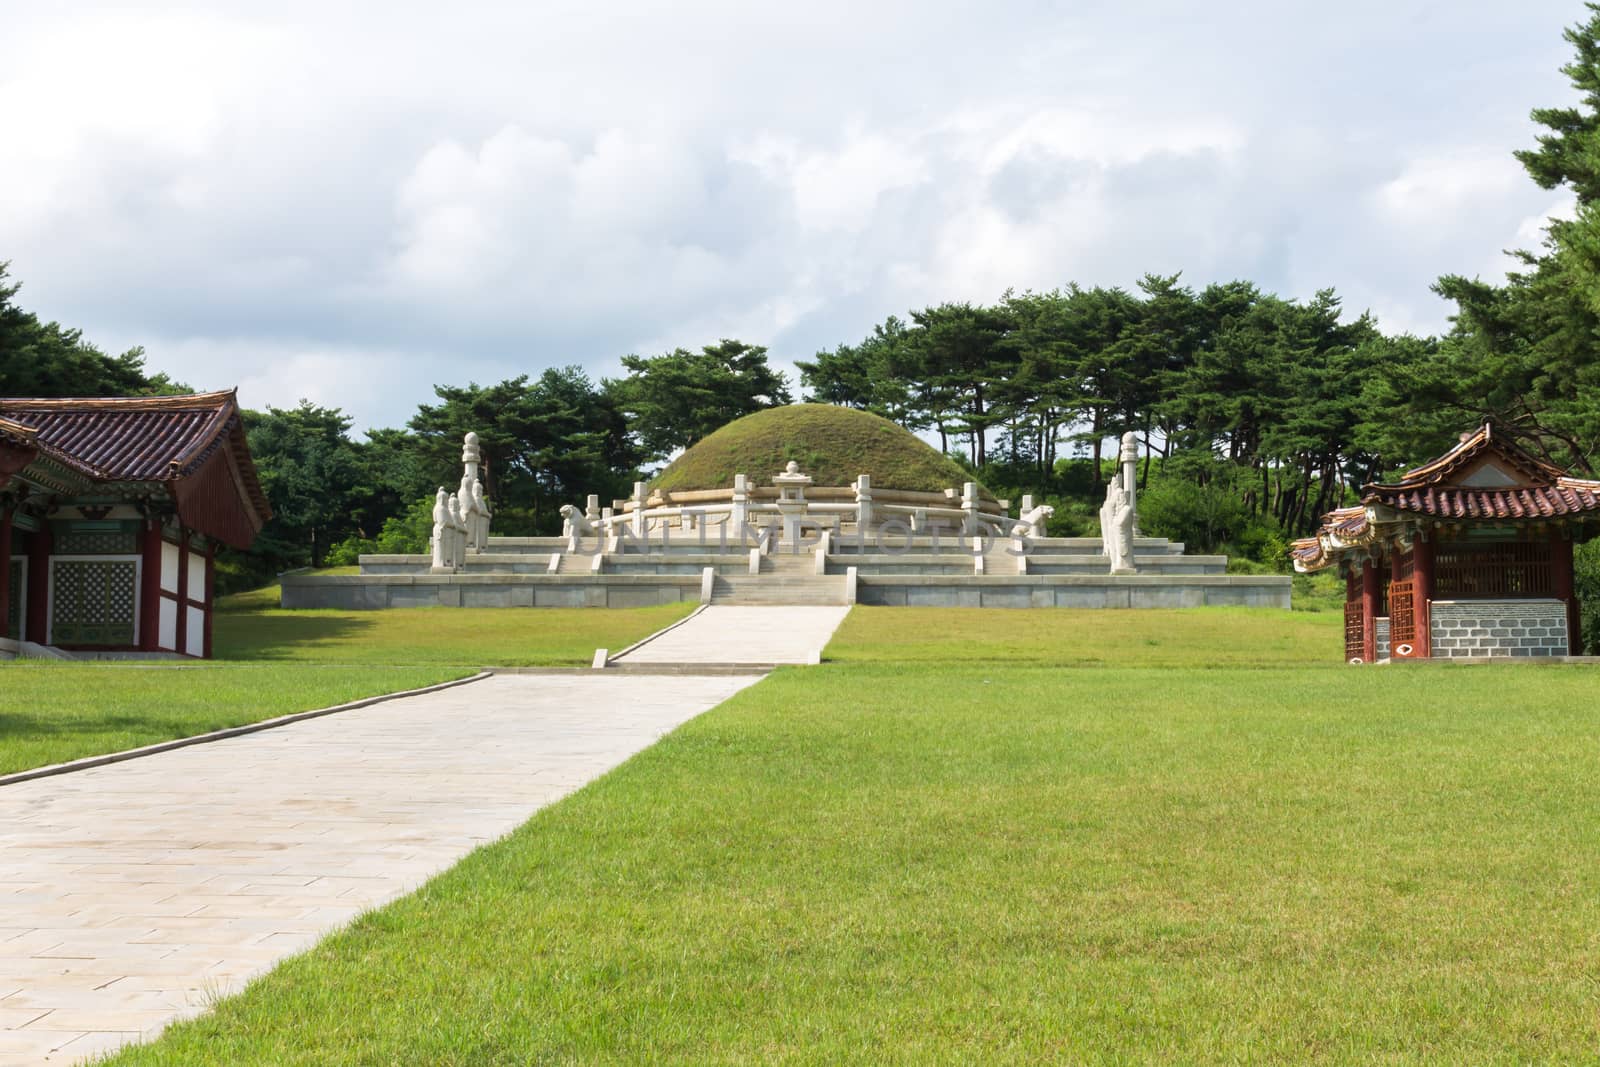 the tomb of king Wang Gon. the founder of Goryeo